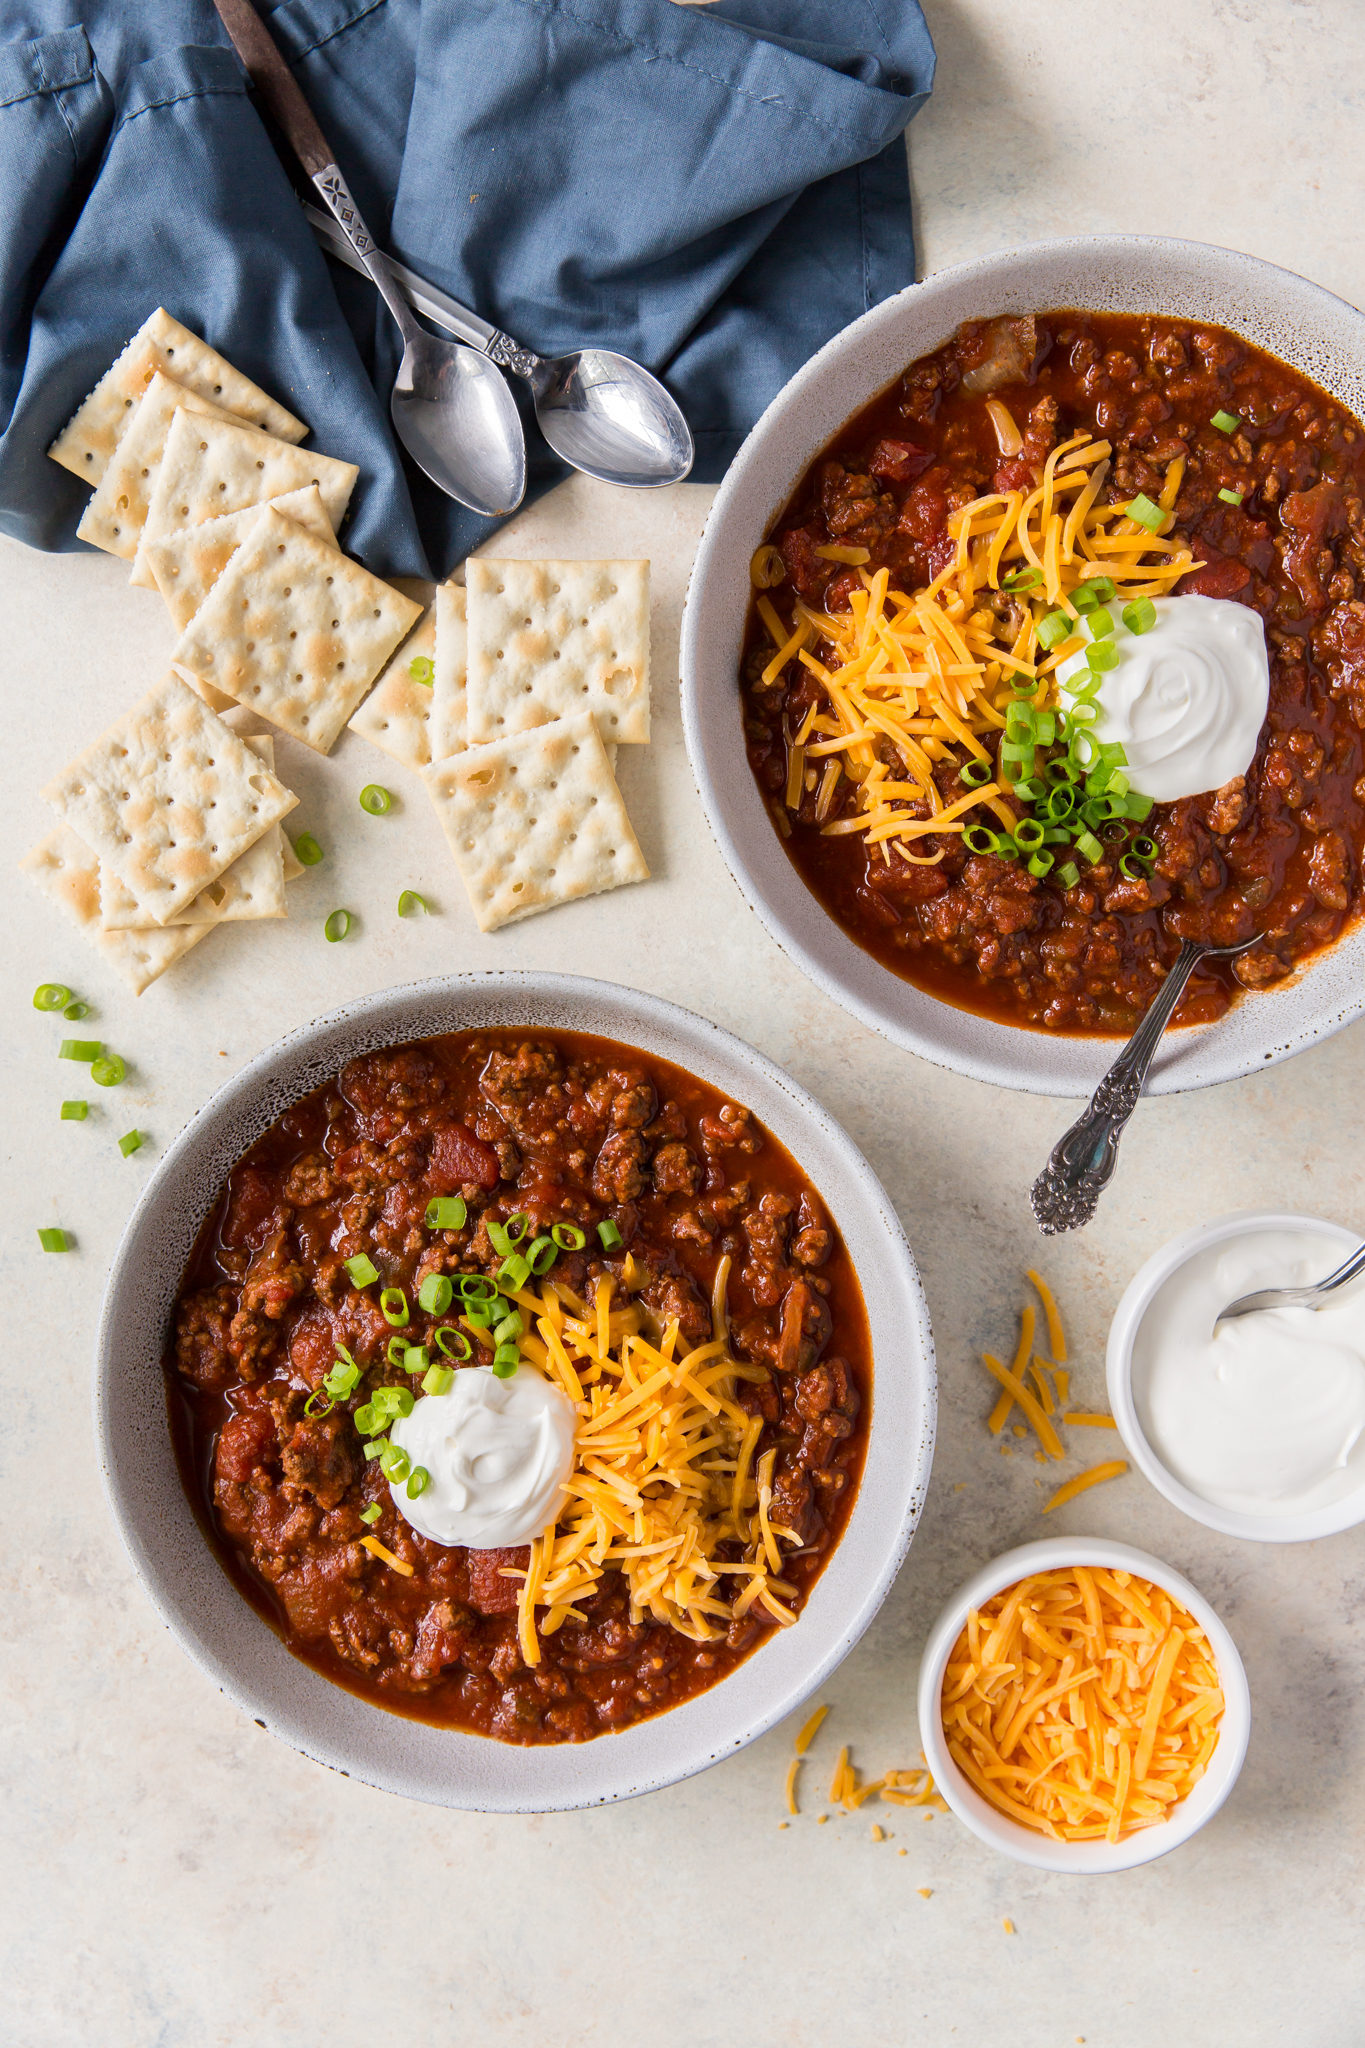 An aerial view of two bowls of bean-free chili topped with side dishes.